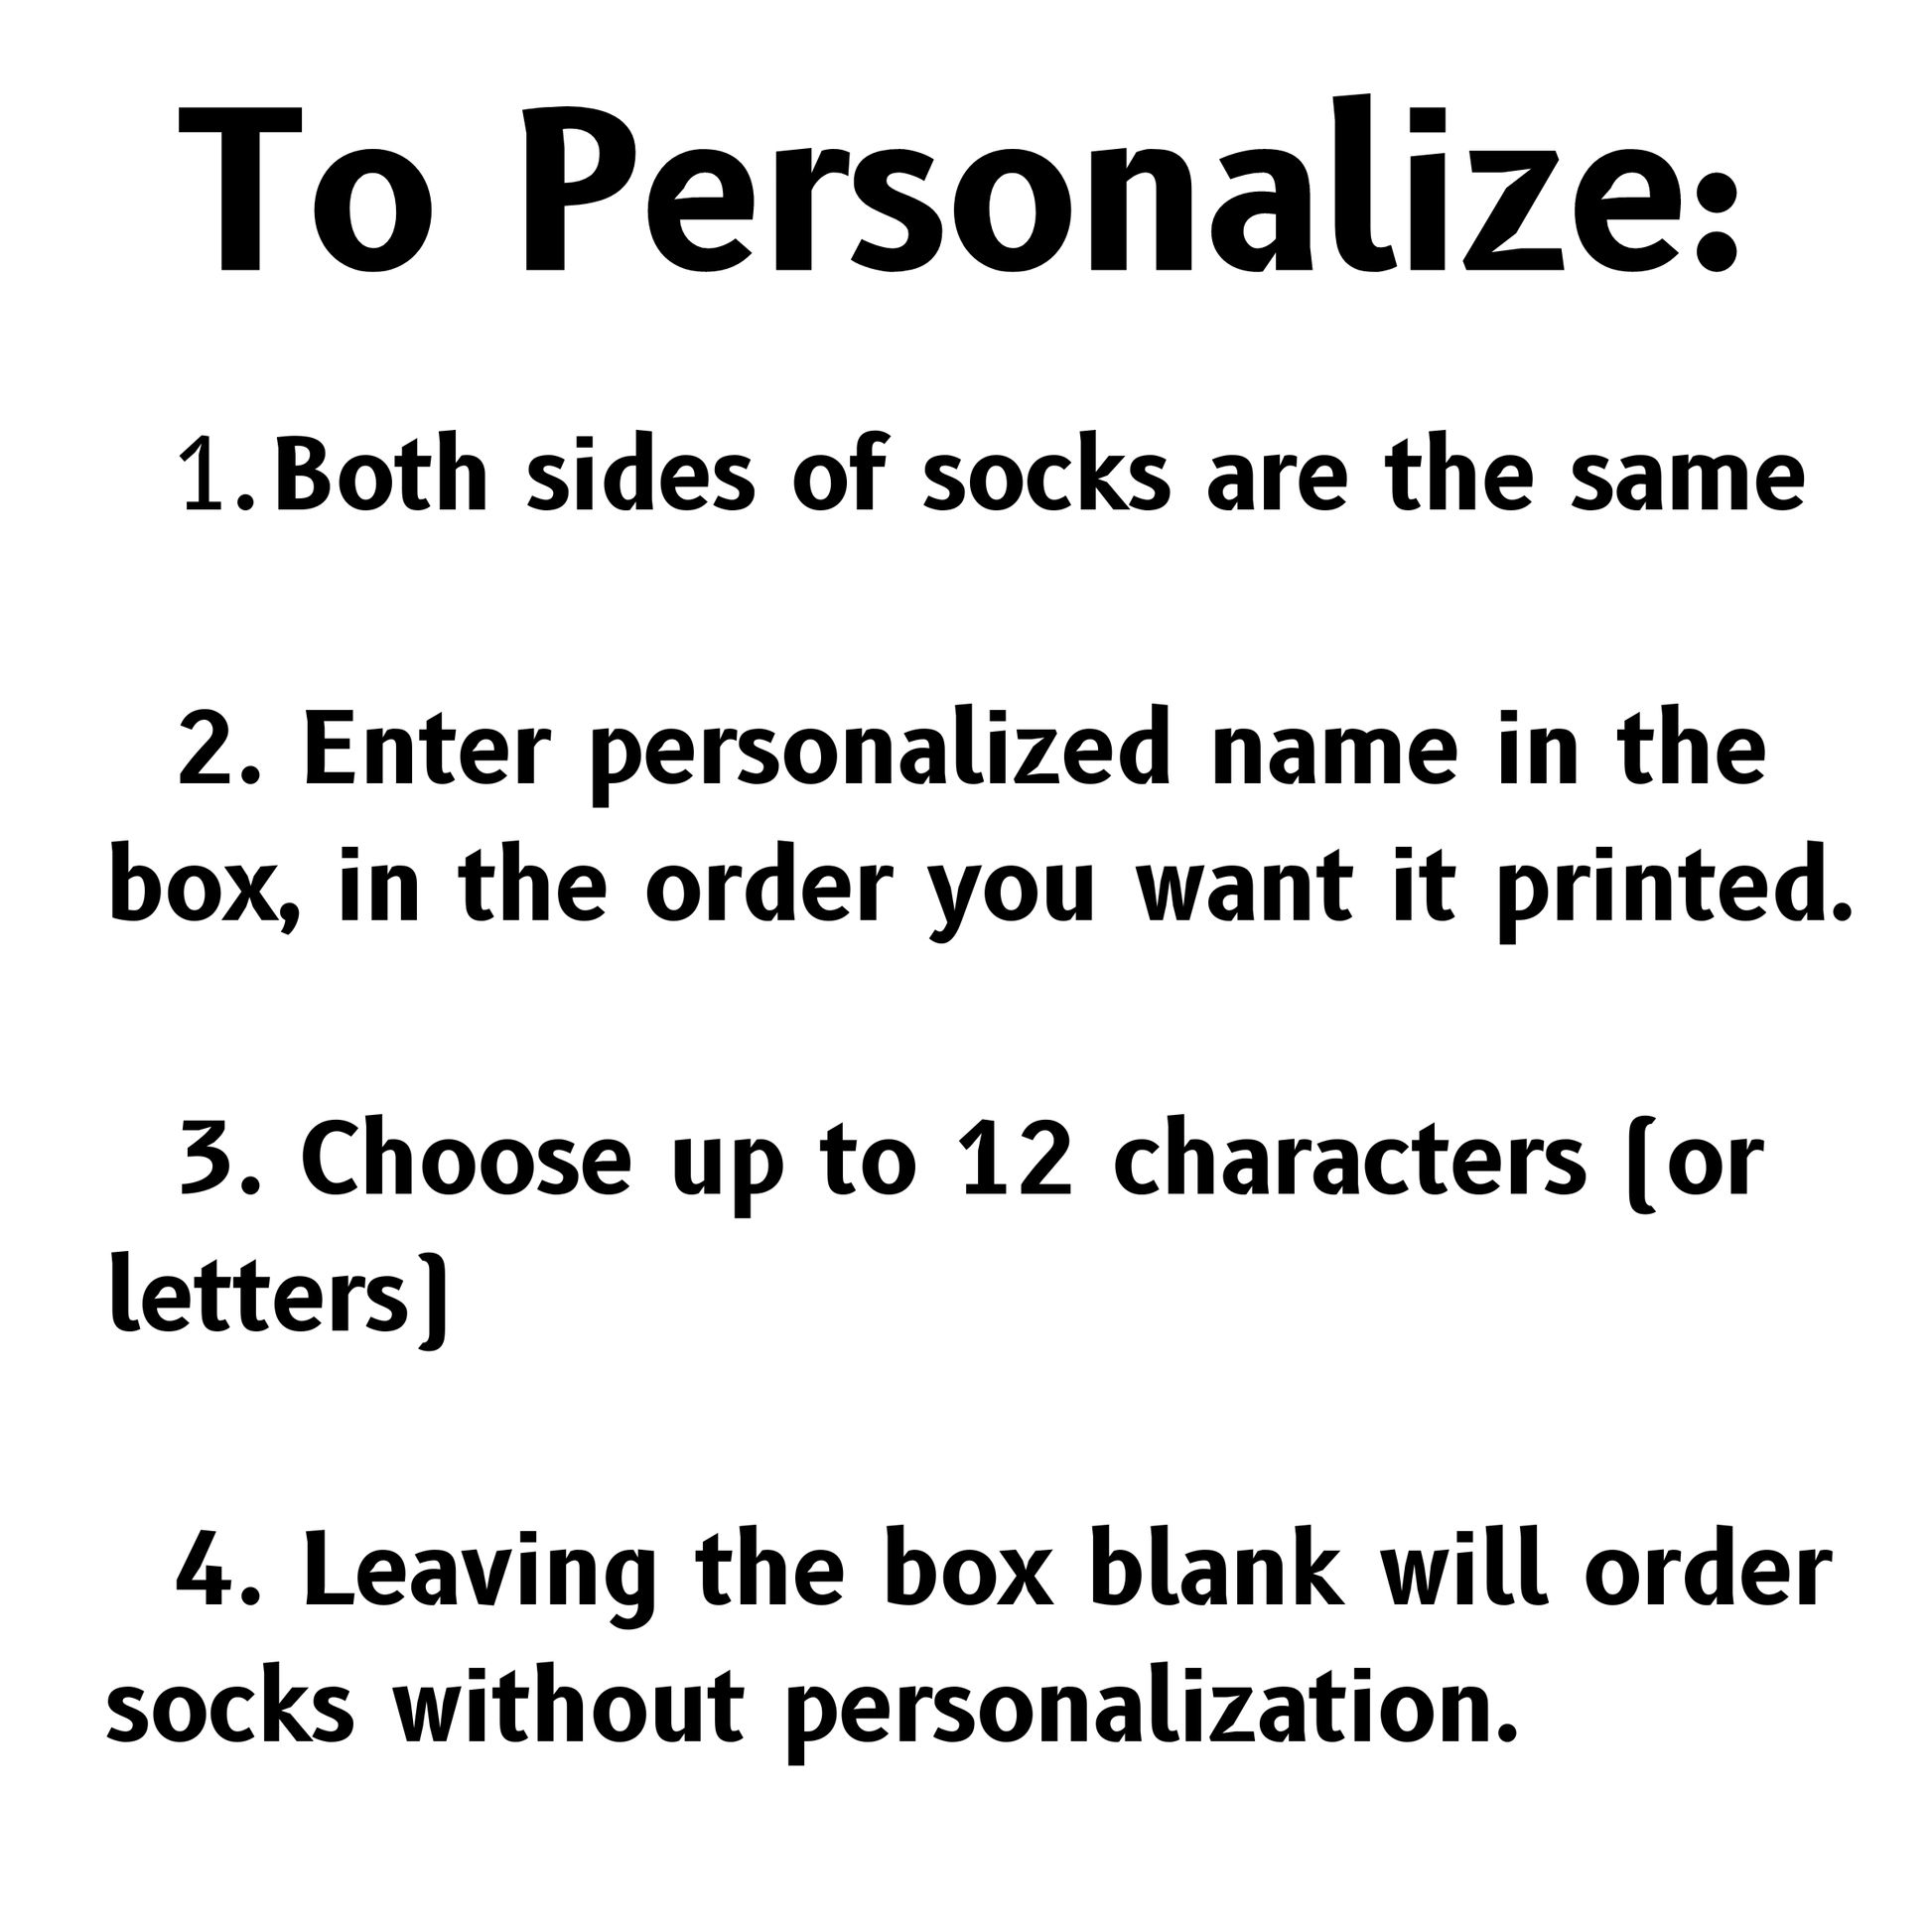 Details on how to personalize your socks up to 12 characters or leave the box blank and get deer horn socks